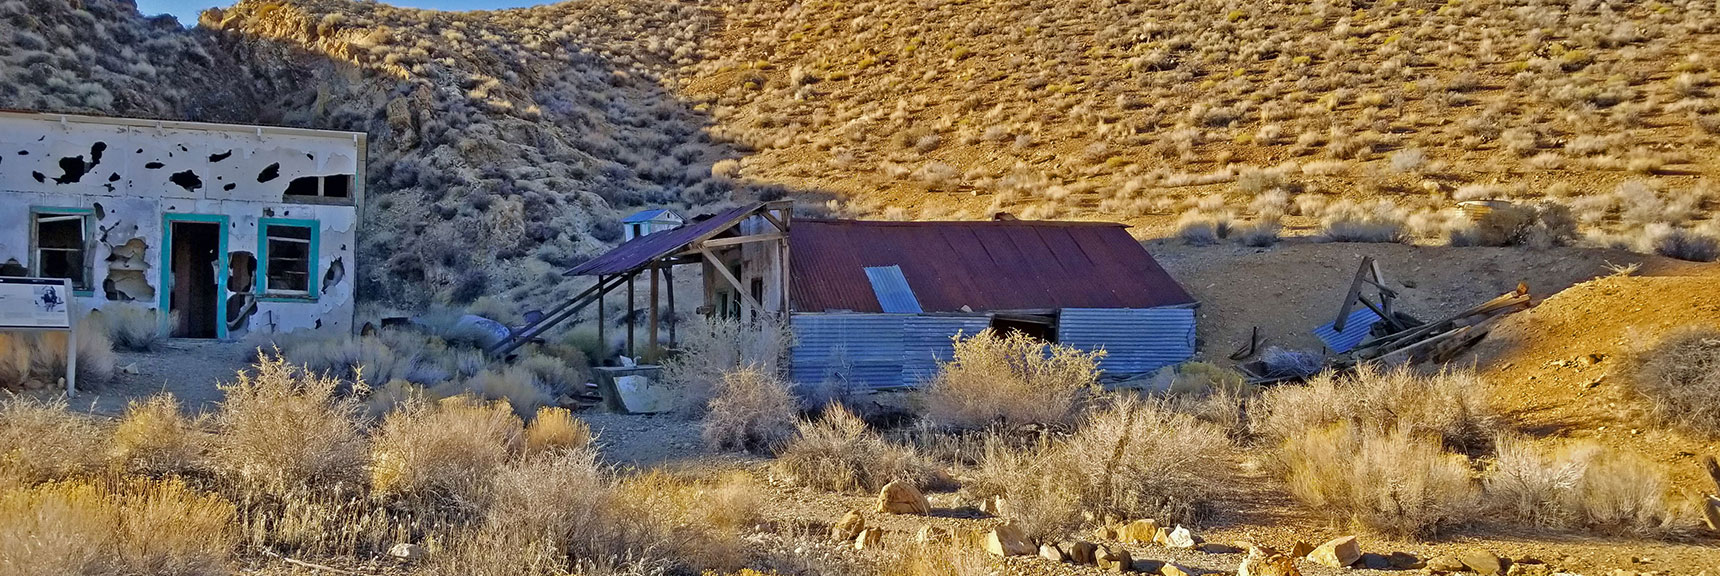 Pete Aguereberry's Home (center) and Outhouse Behind | Eureka Mine, Harrisburg, Cashier Mill, Death Valley, California